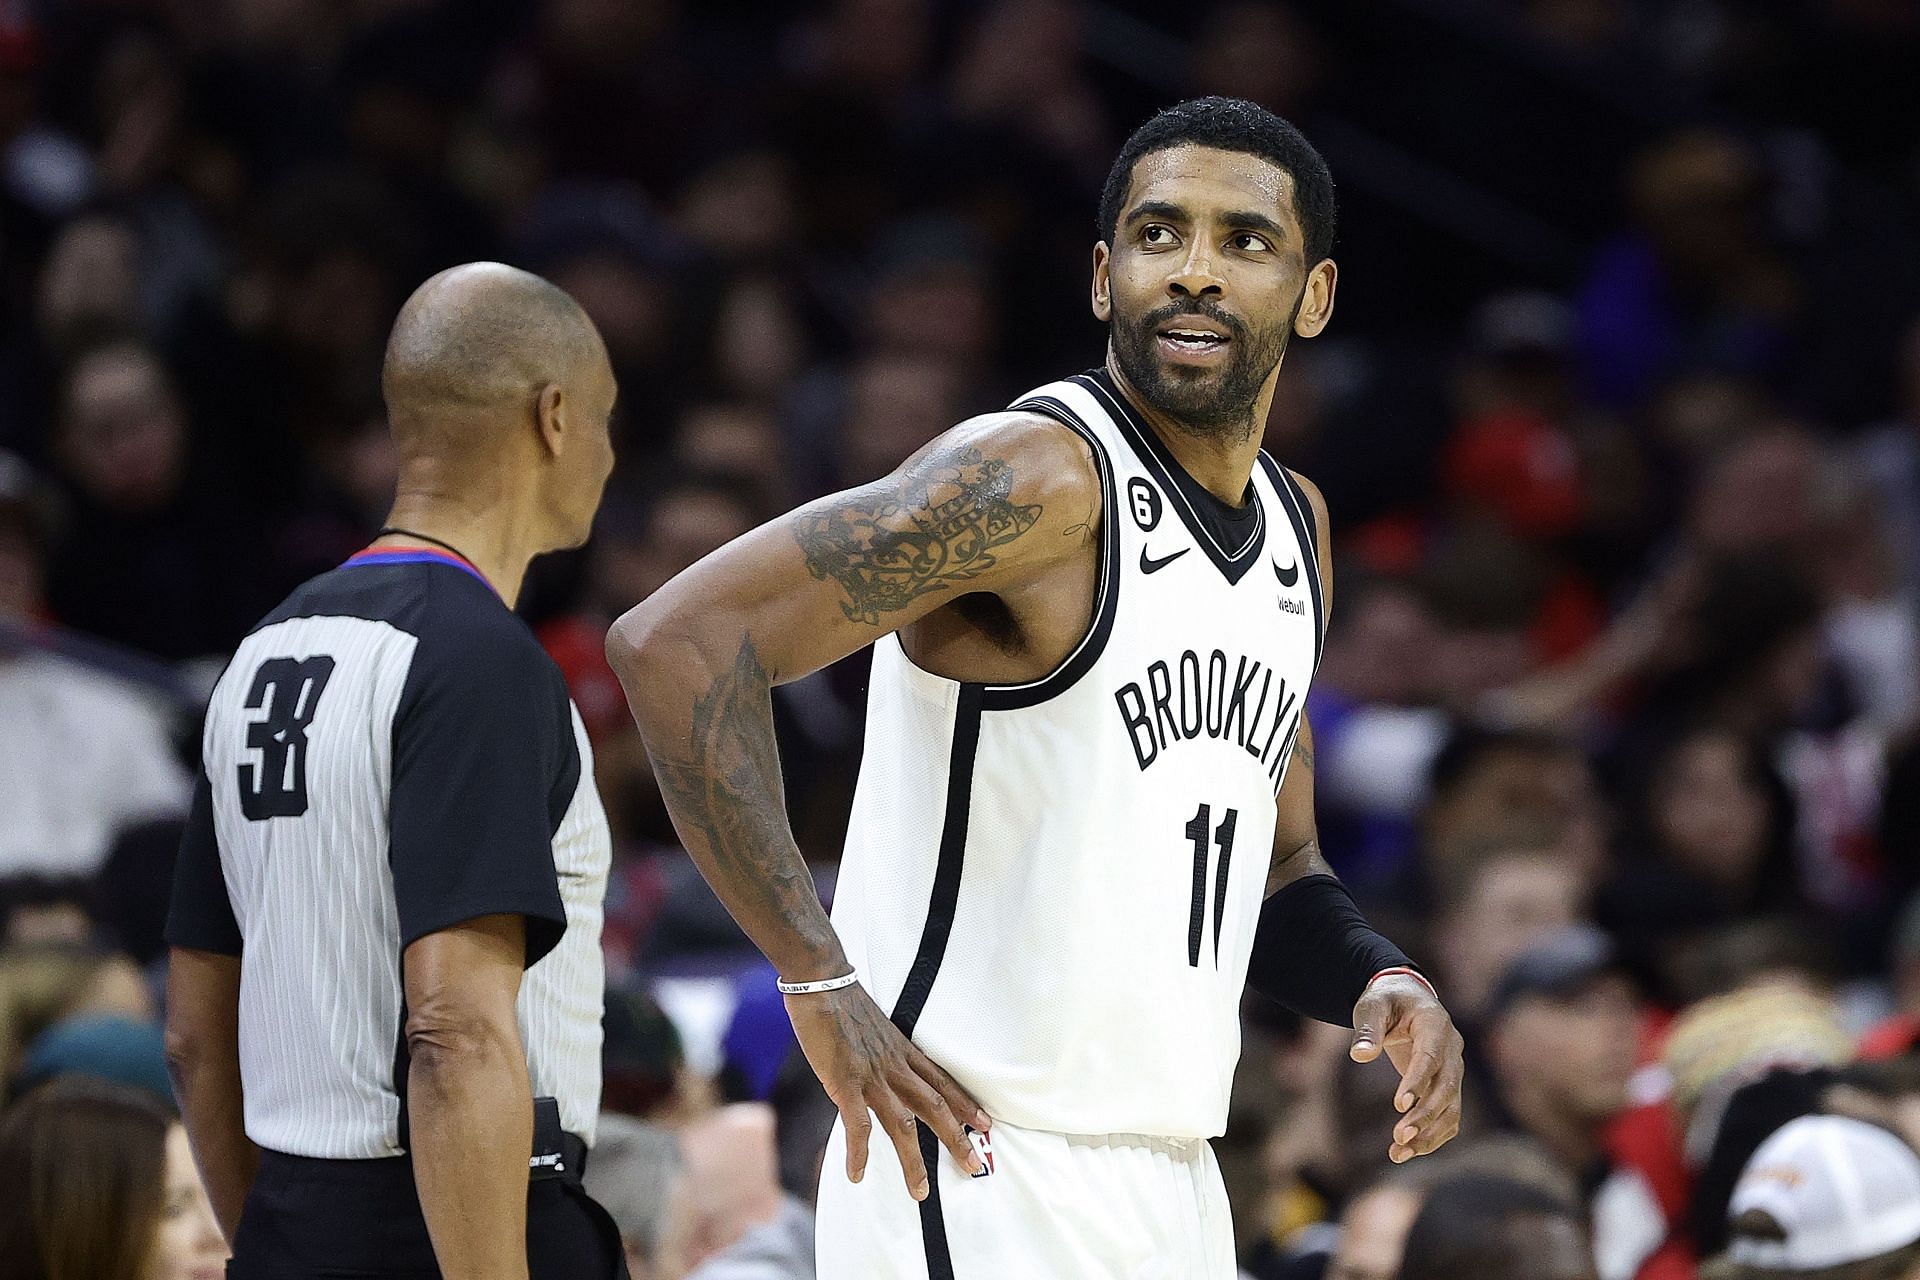 Brooklyn Nets All-Star point guard Kyrie Irving